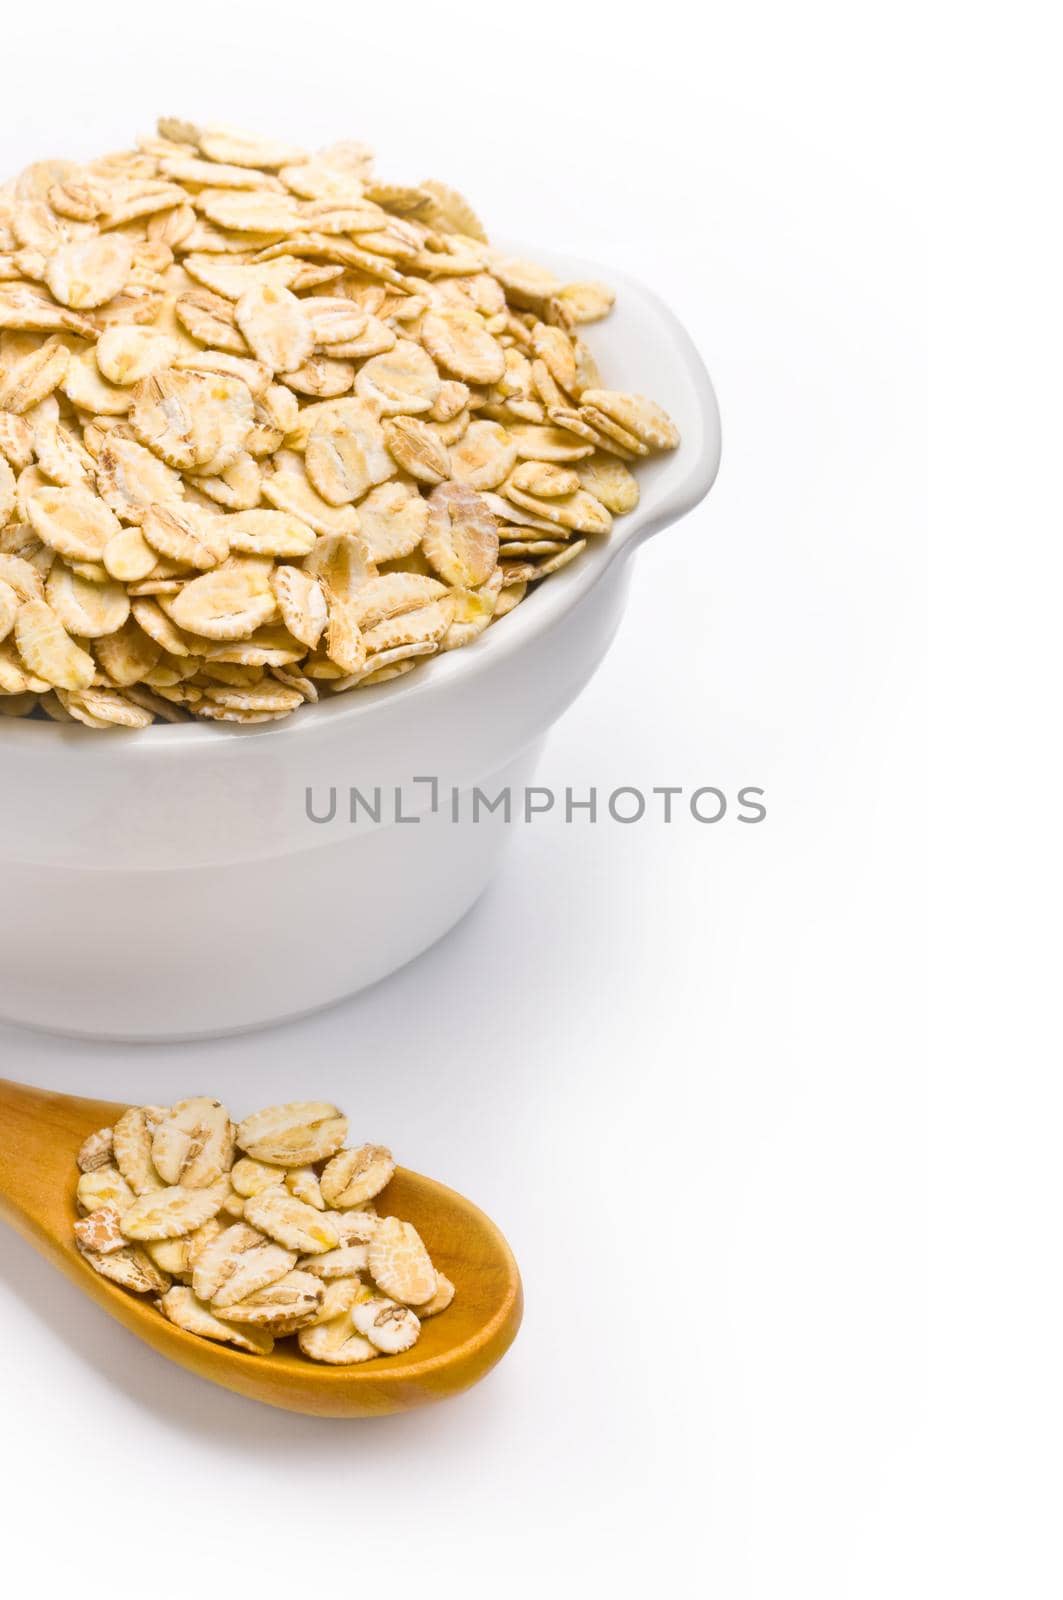 Cereal bowl on white background.